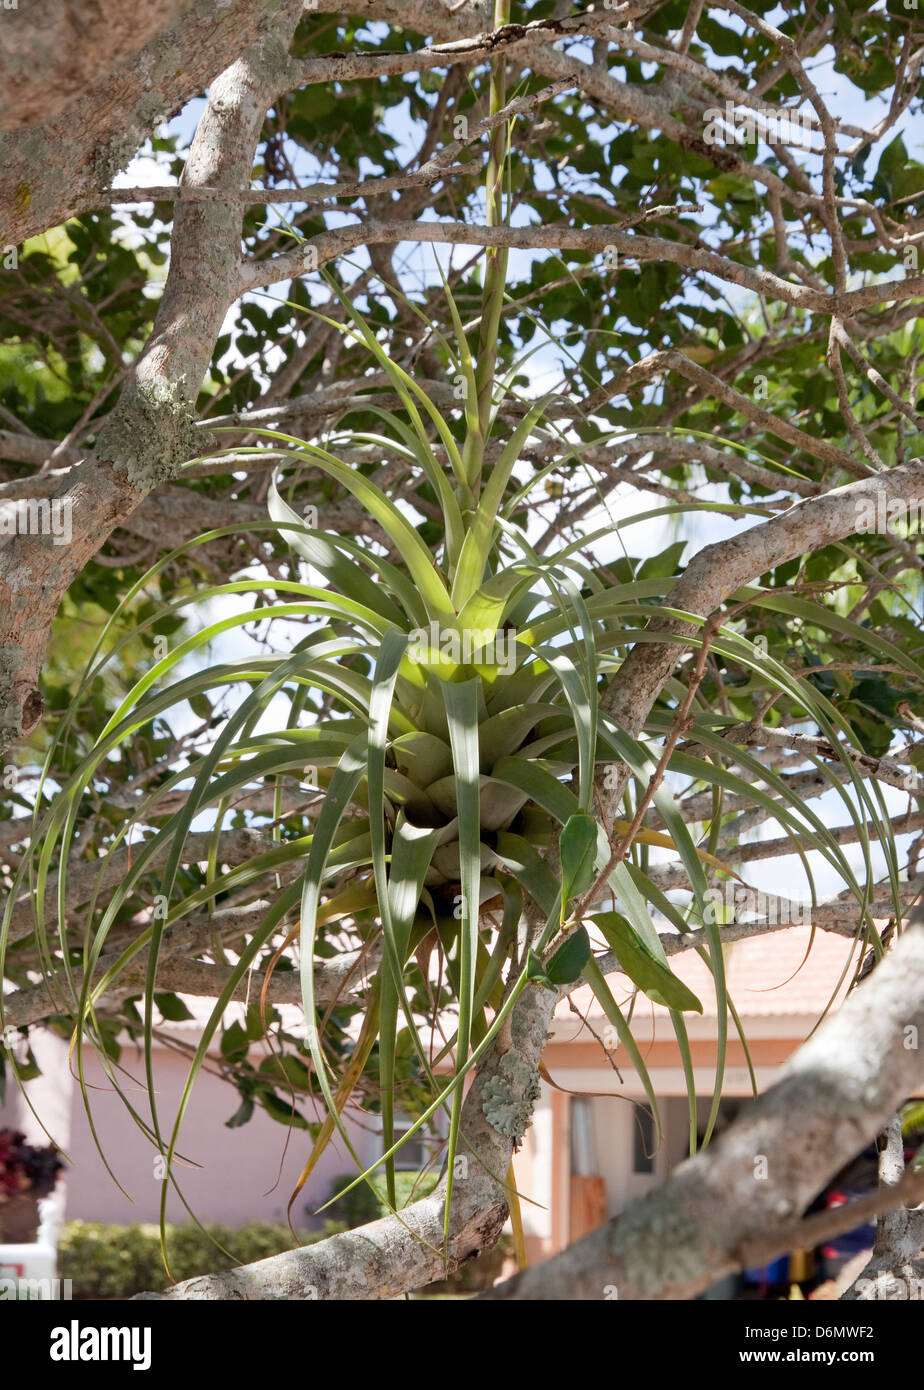 Tillandsia utriculata, largest Air Plant in the bromeliad family. An epiphyte which lives on a host tree, doesn't require soil. Southern Florida. Stock Photo